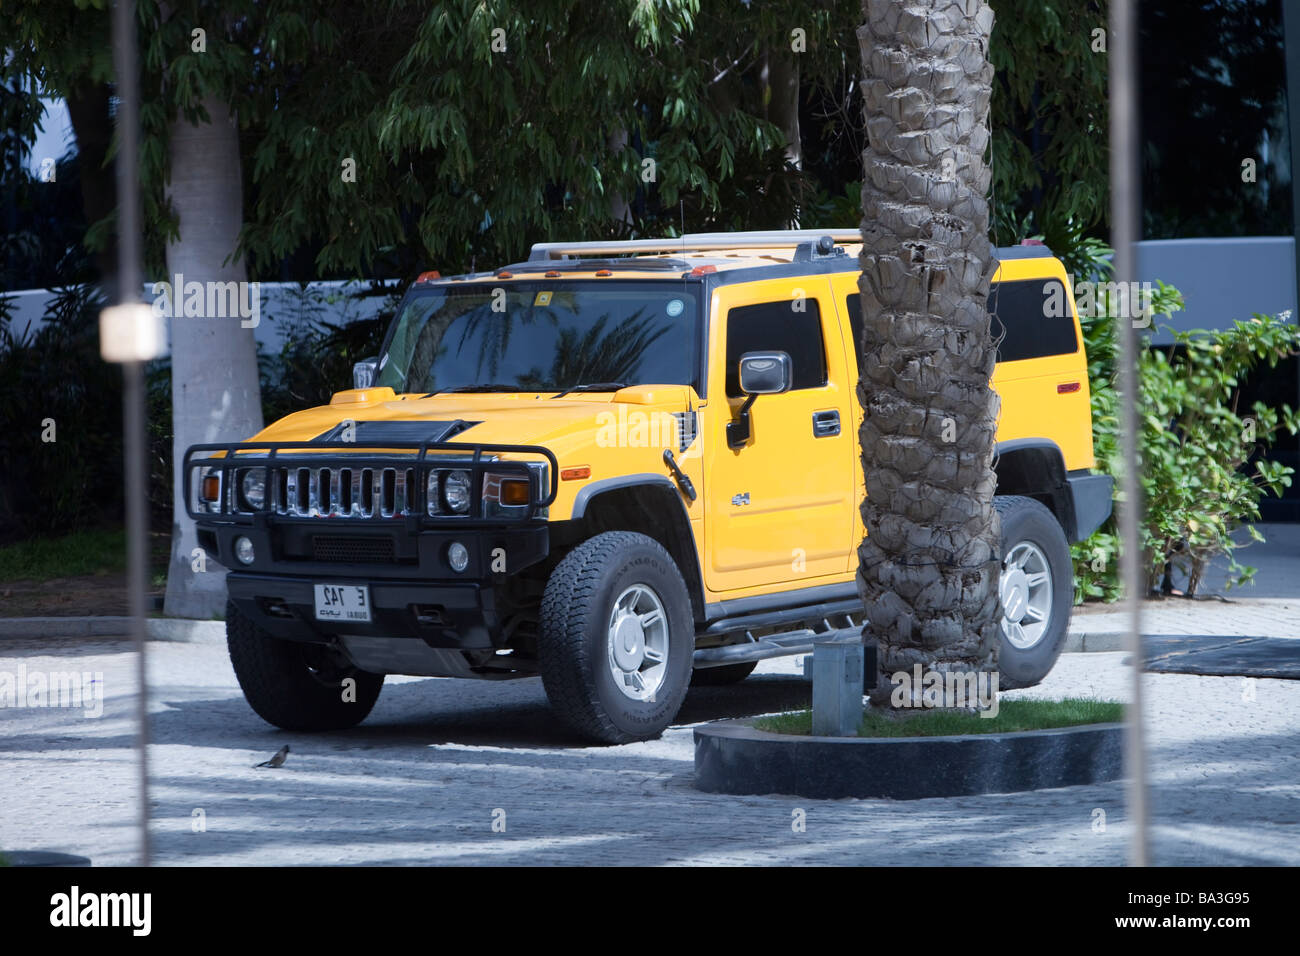 A Hummer reflected in a glass window in Dubai Stock Photo